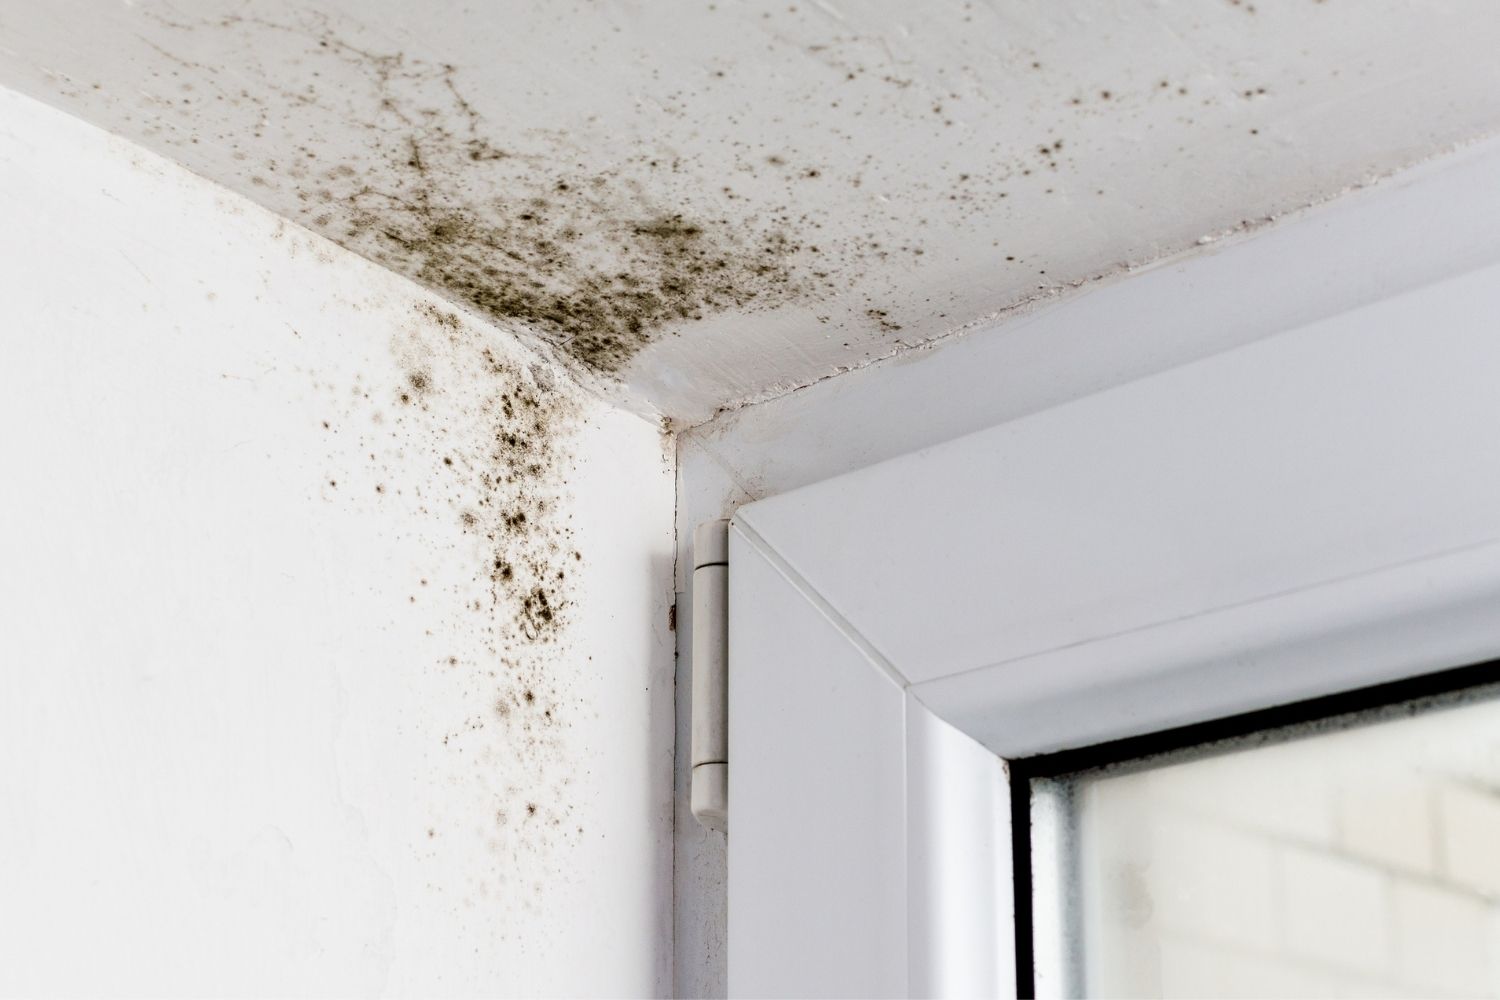 How to Remove Mould from the Ceiling?